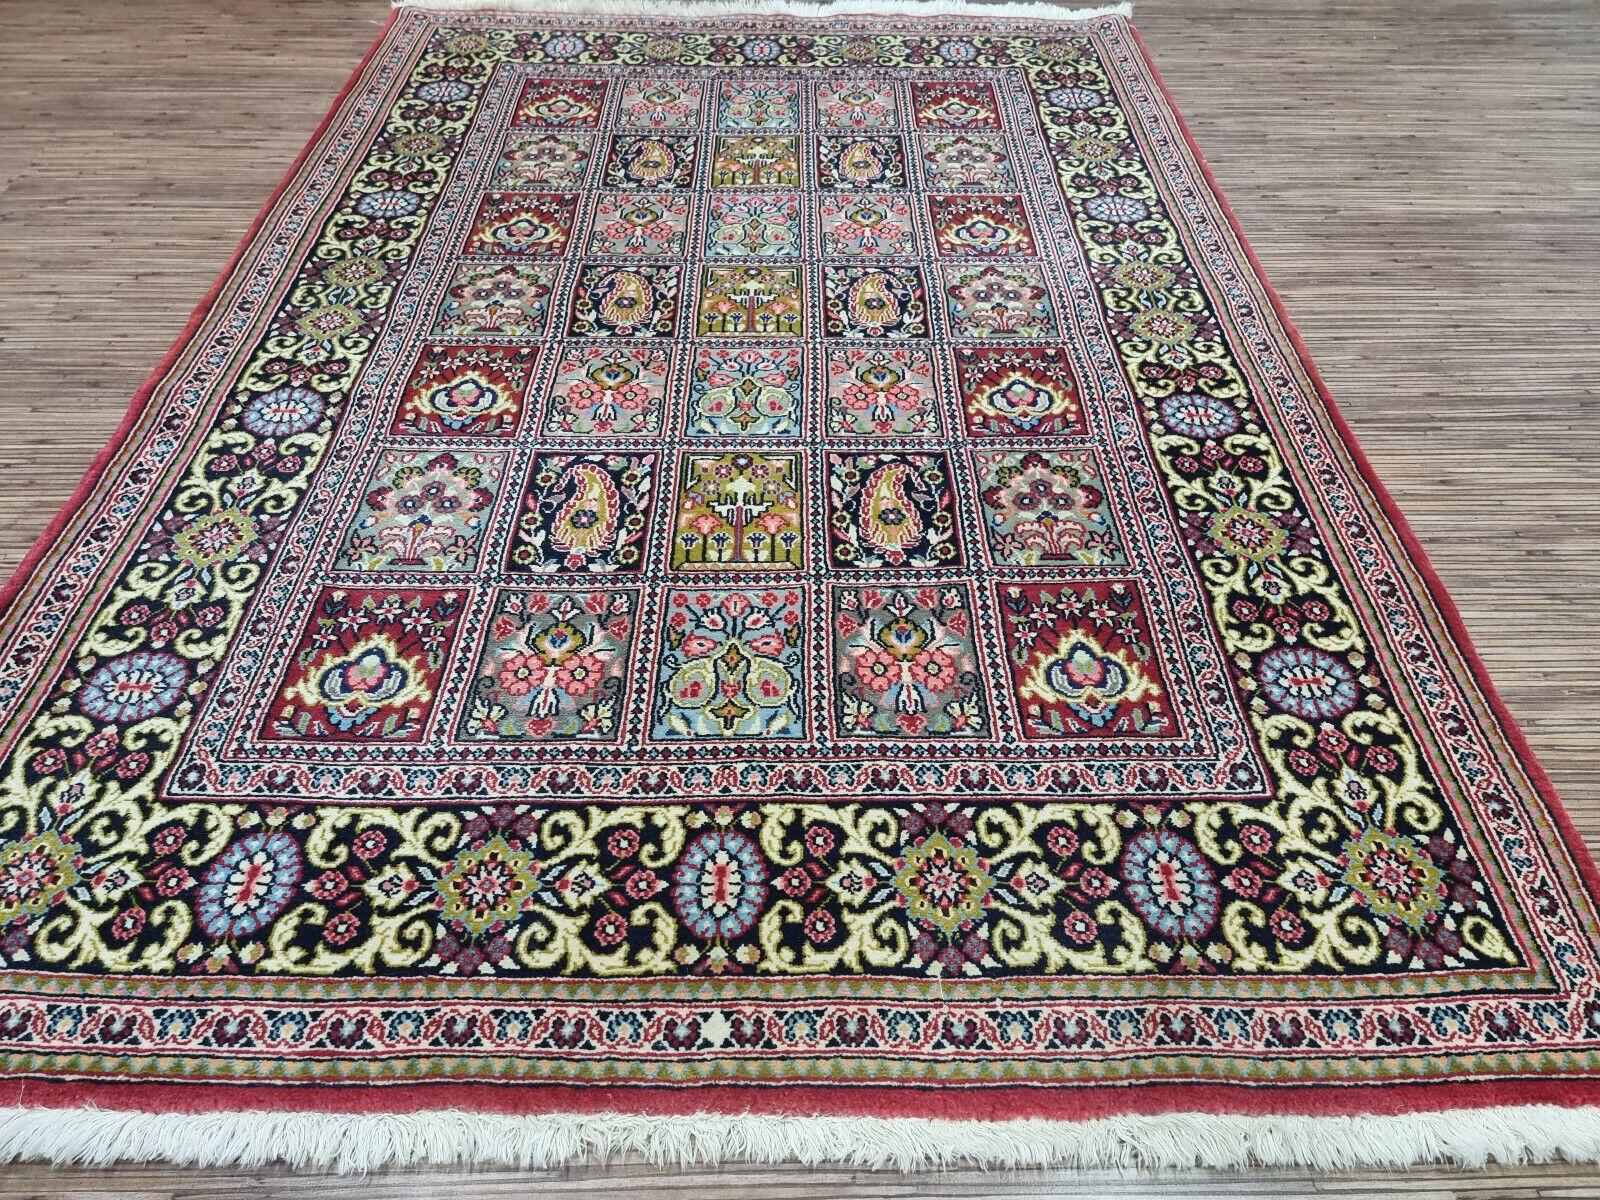 Hand-Knotted Handmade Vintage Persian Style Qum Rug 3.6' x 5.1', 1970s - 1D87 For Sale